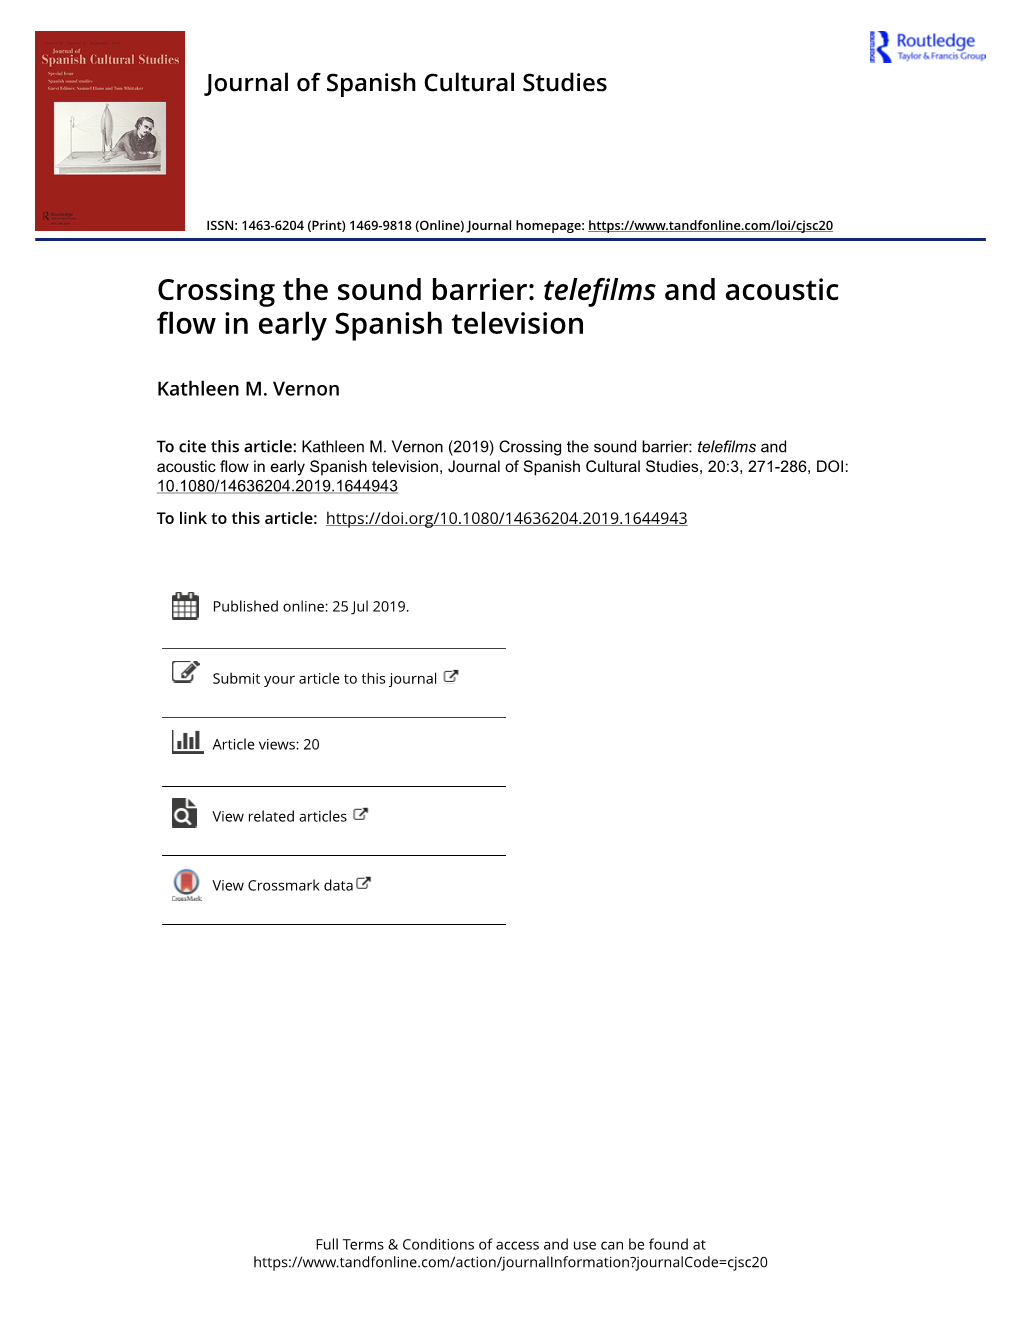 Crossing the Sound Barrier: Telefilms and Acoustic Flow in Early Spanish Television